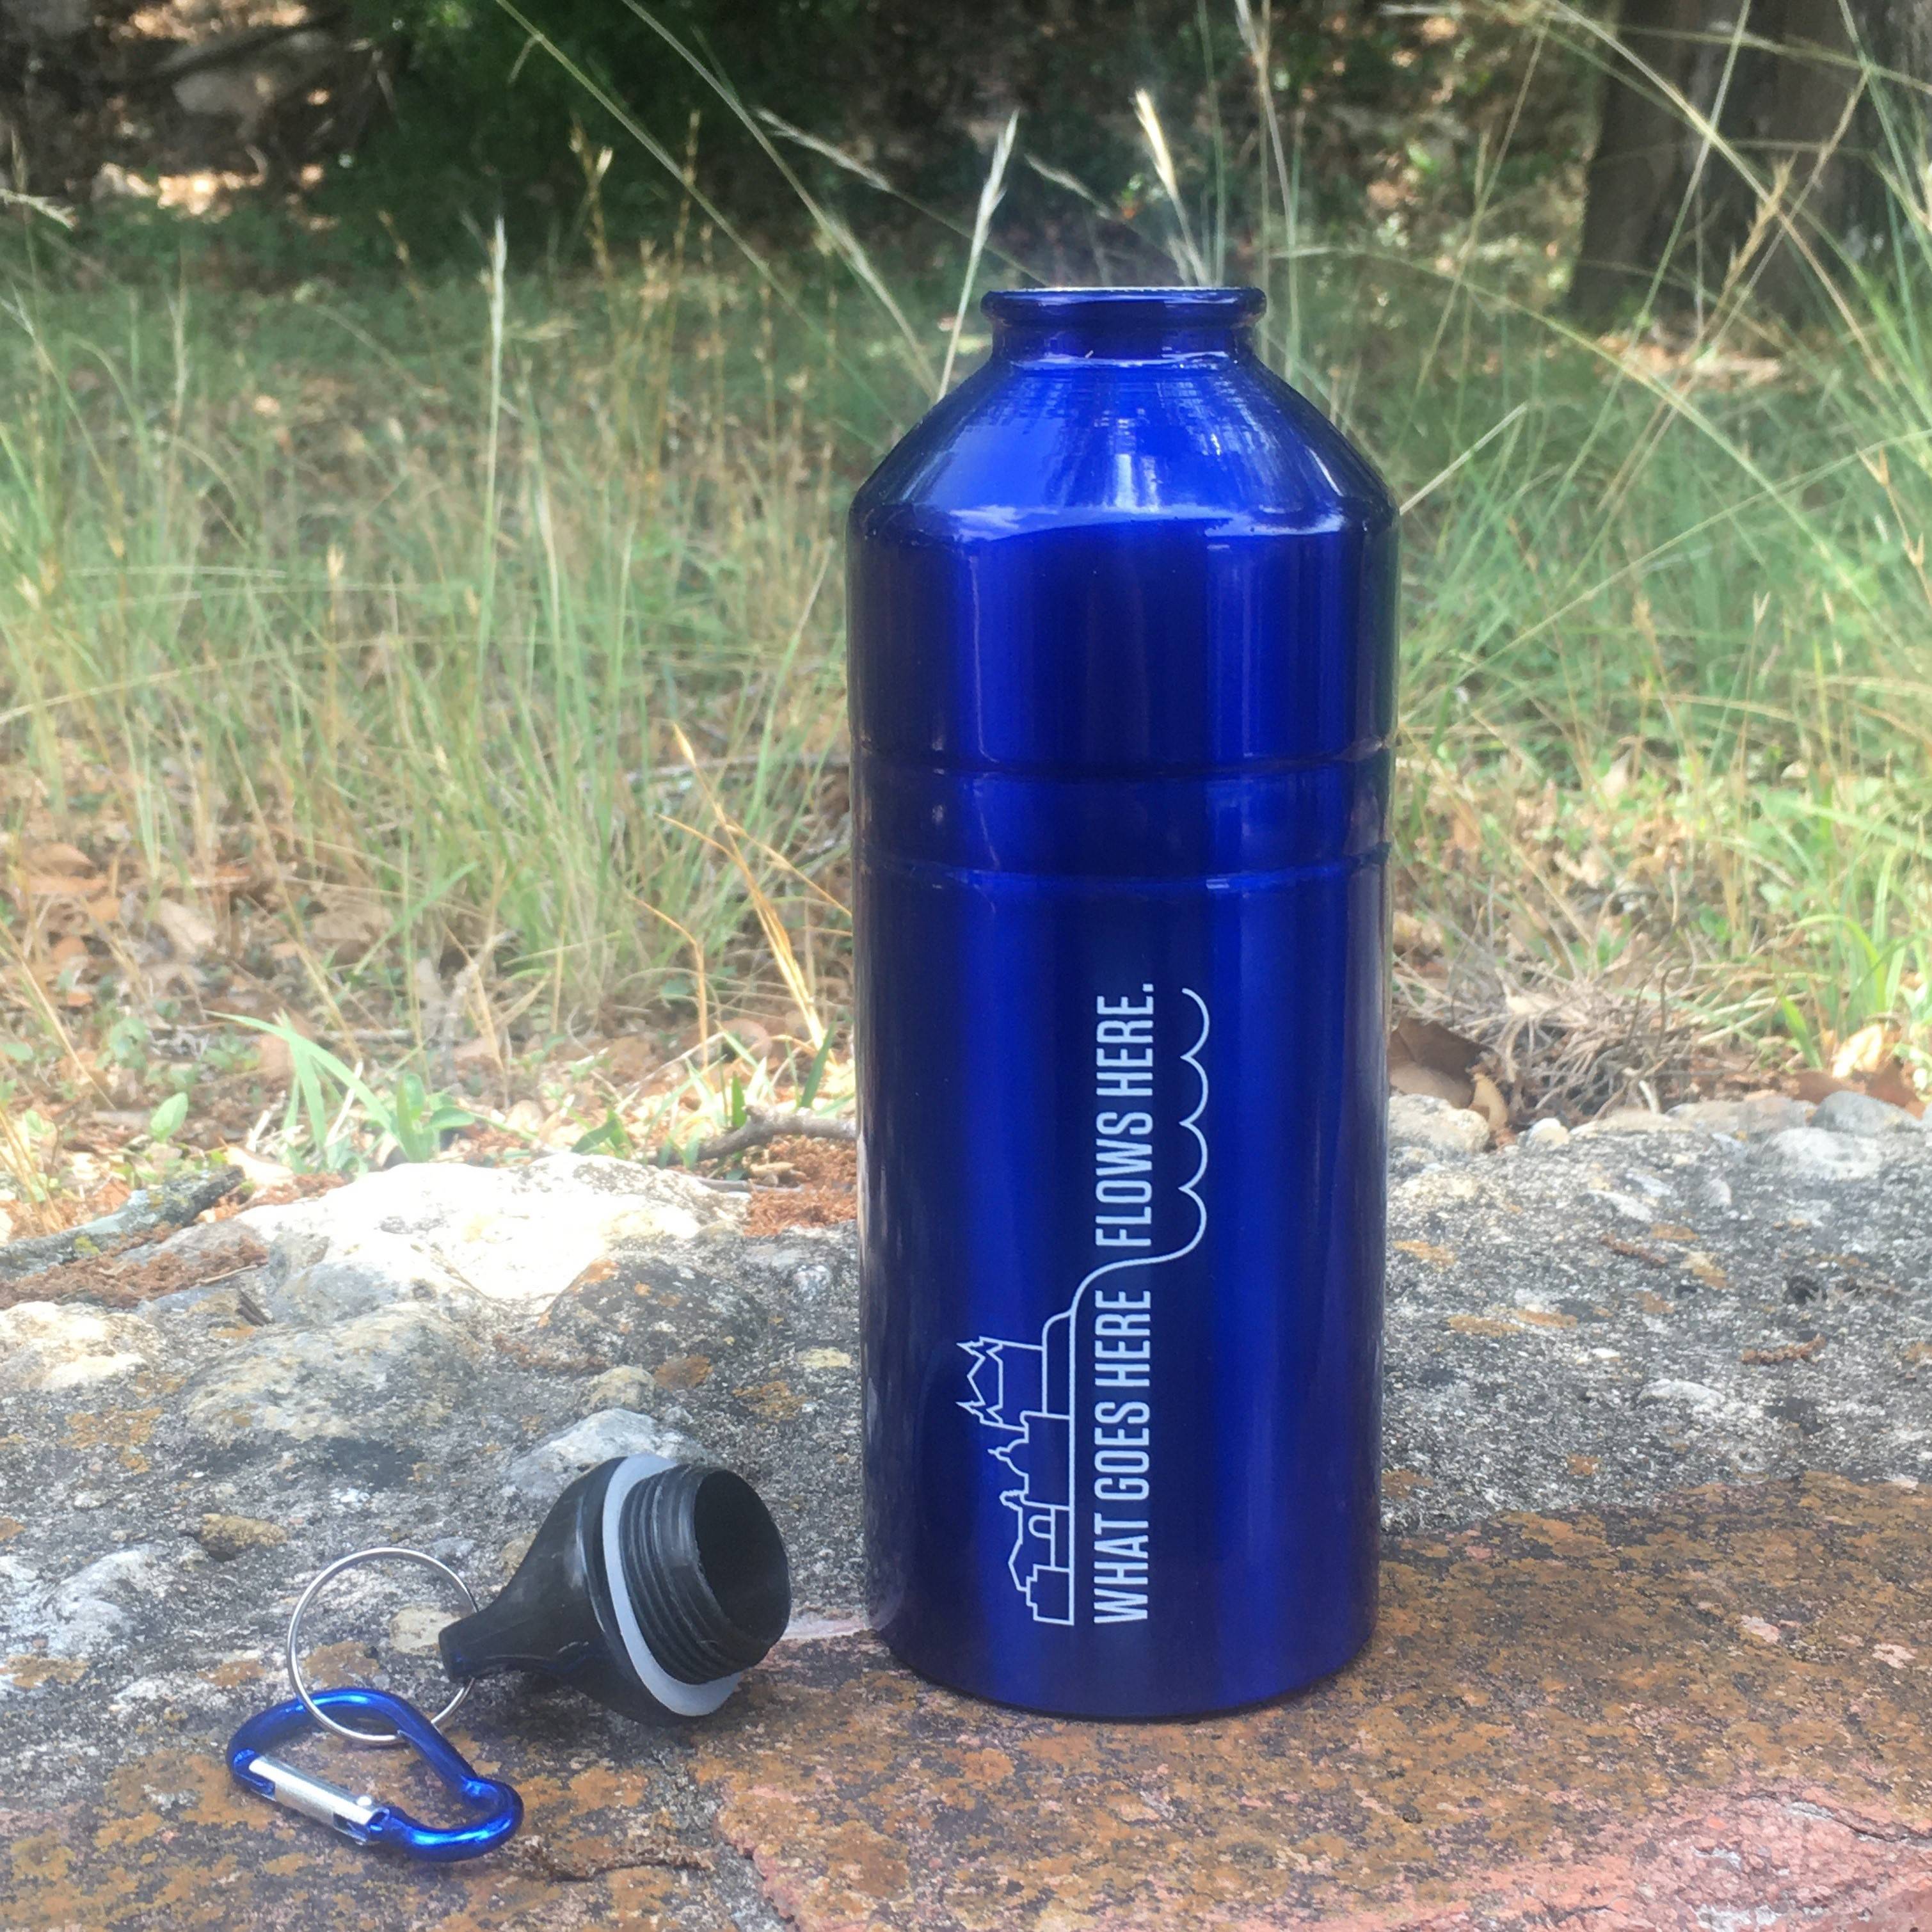 A reusable blue, metal water bottle that says "What Goes Here Flows Here" is sitting on a brick wall with the cap next to it.